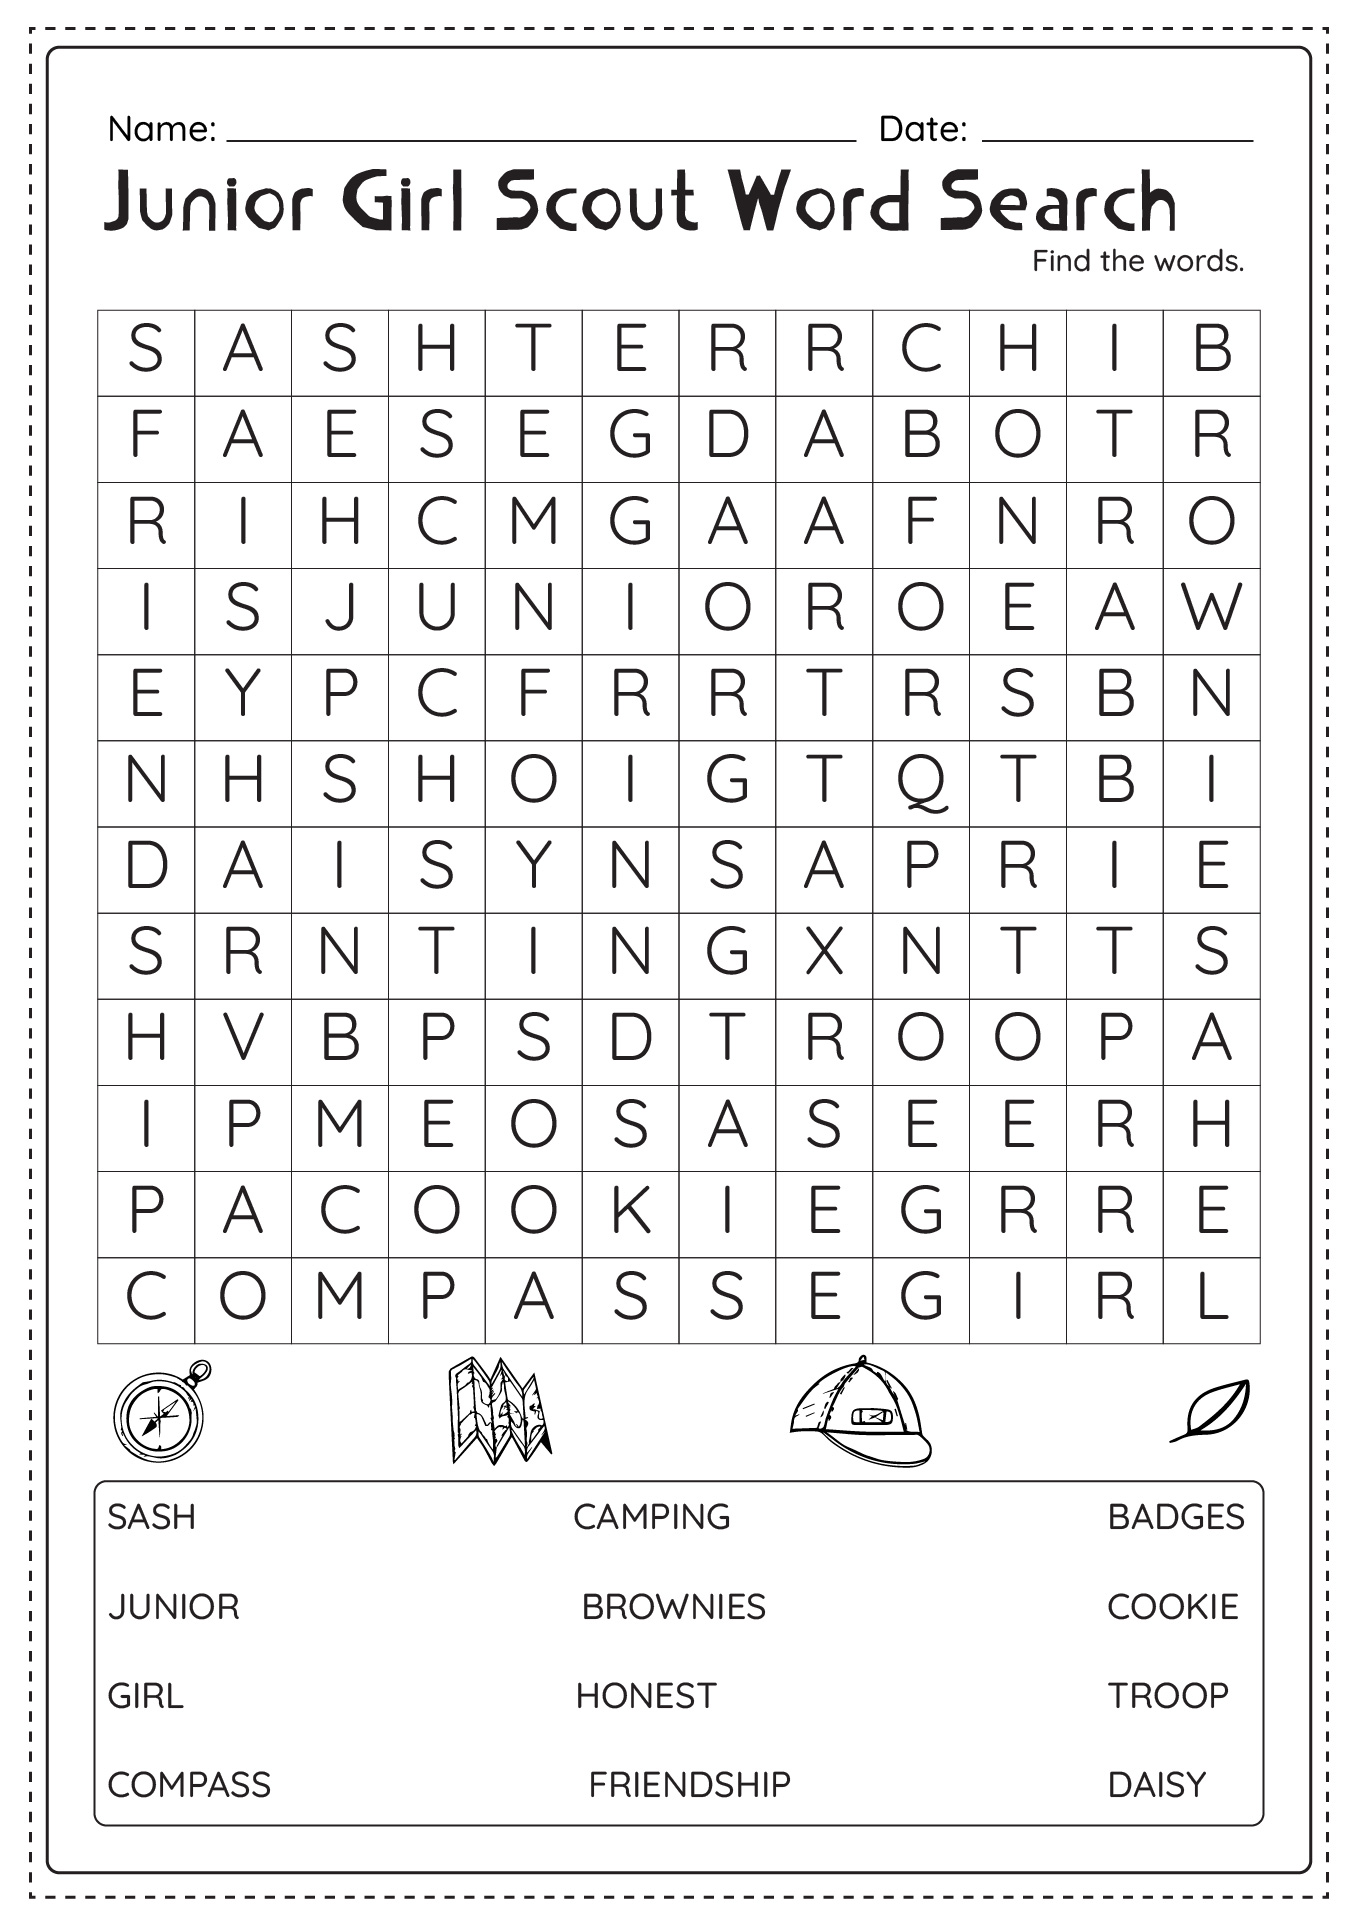 Junior Girl Scout Word Search